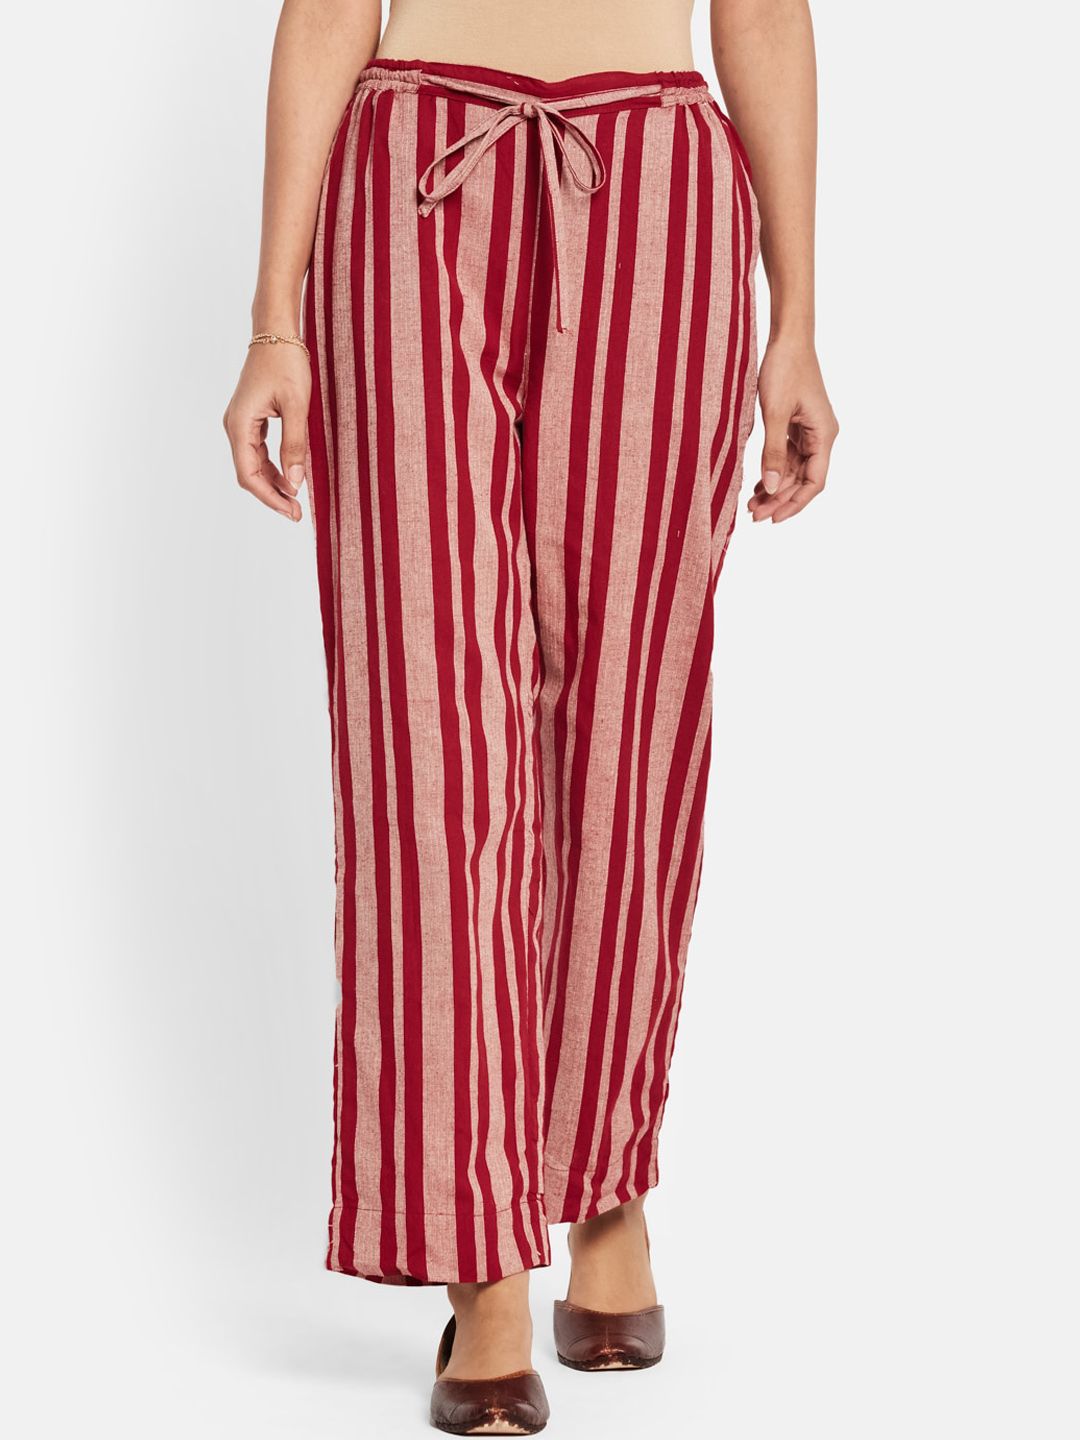 Fabindia Women Red & Beige Striped Cotton Casual Trousers Price in India